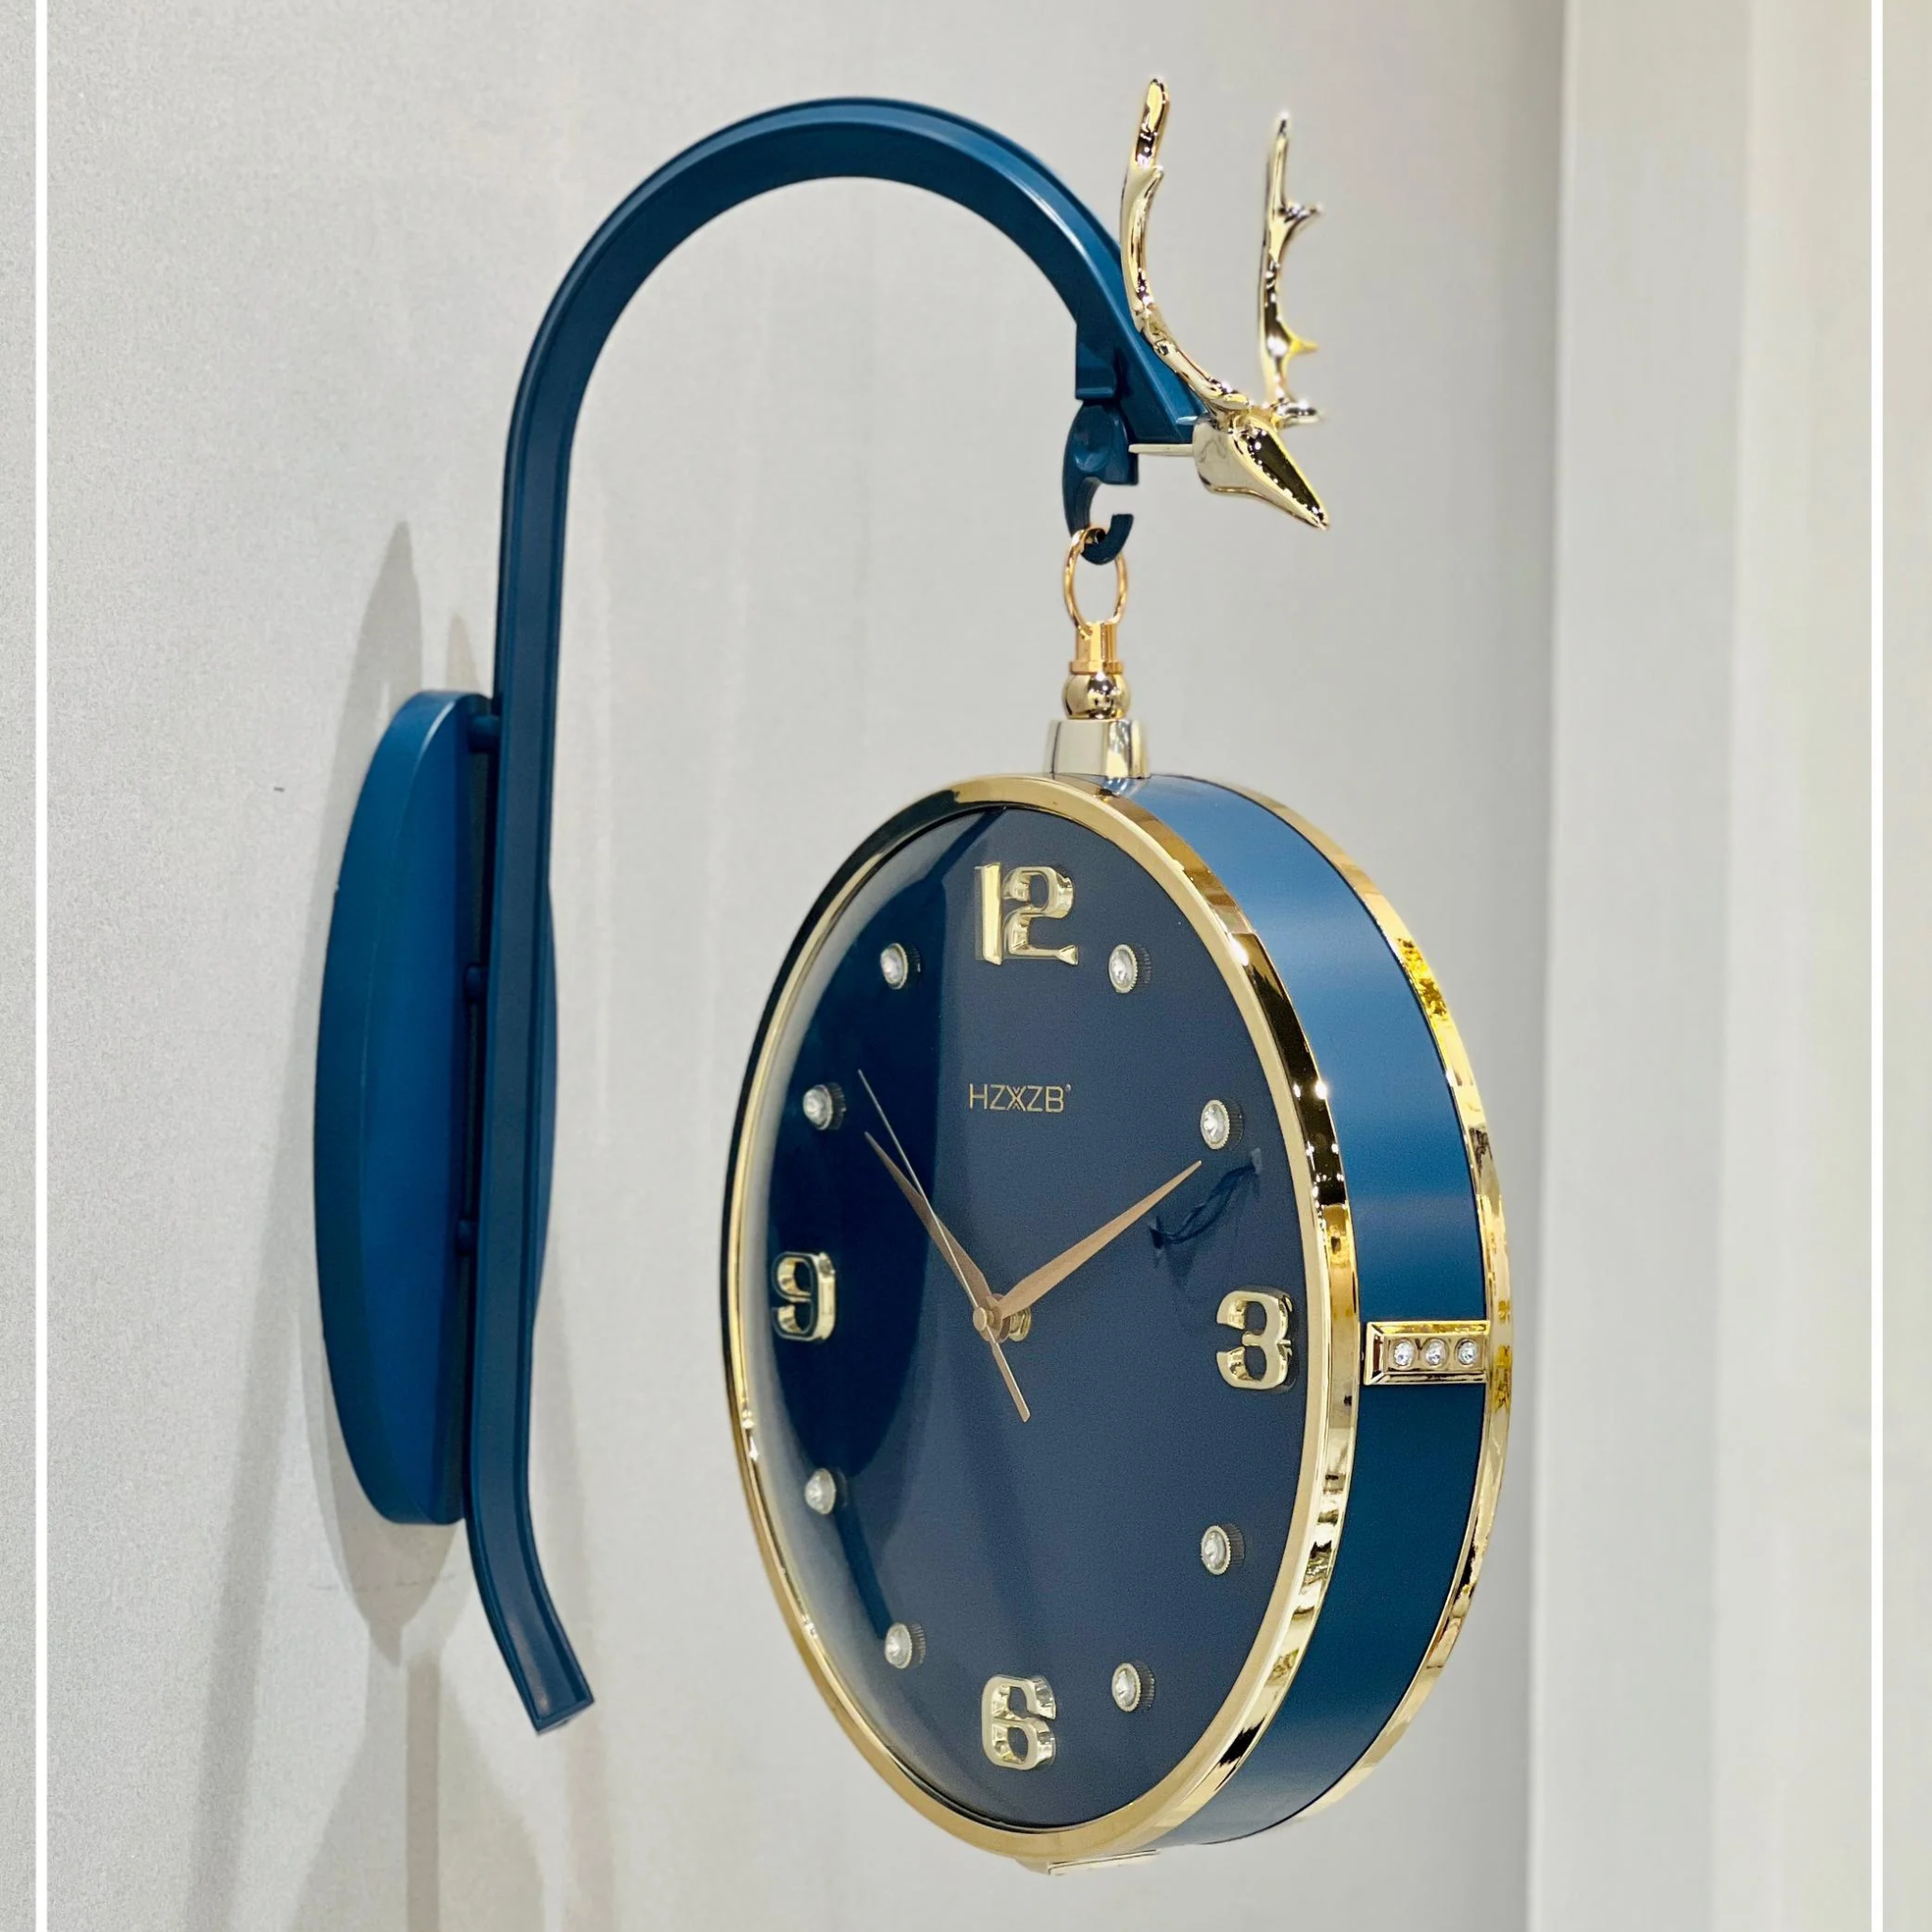 Antelope head Double Dial Hanging Wall Clock